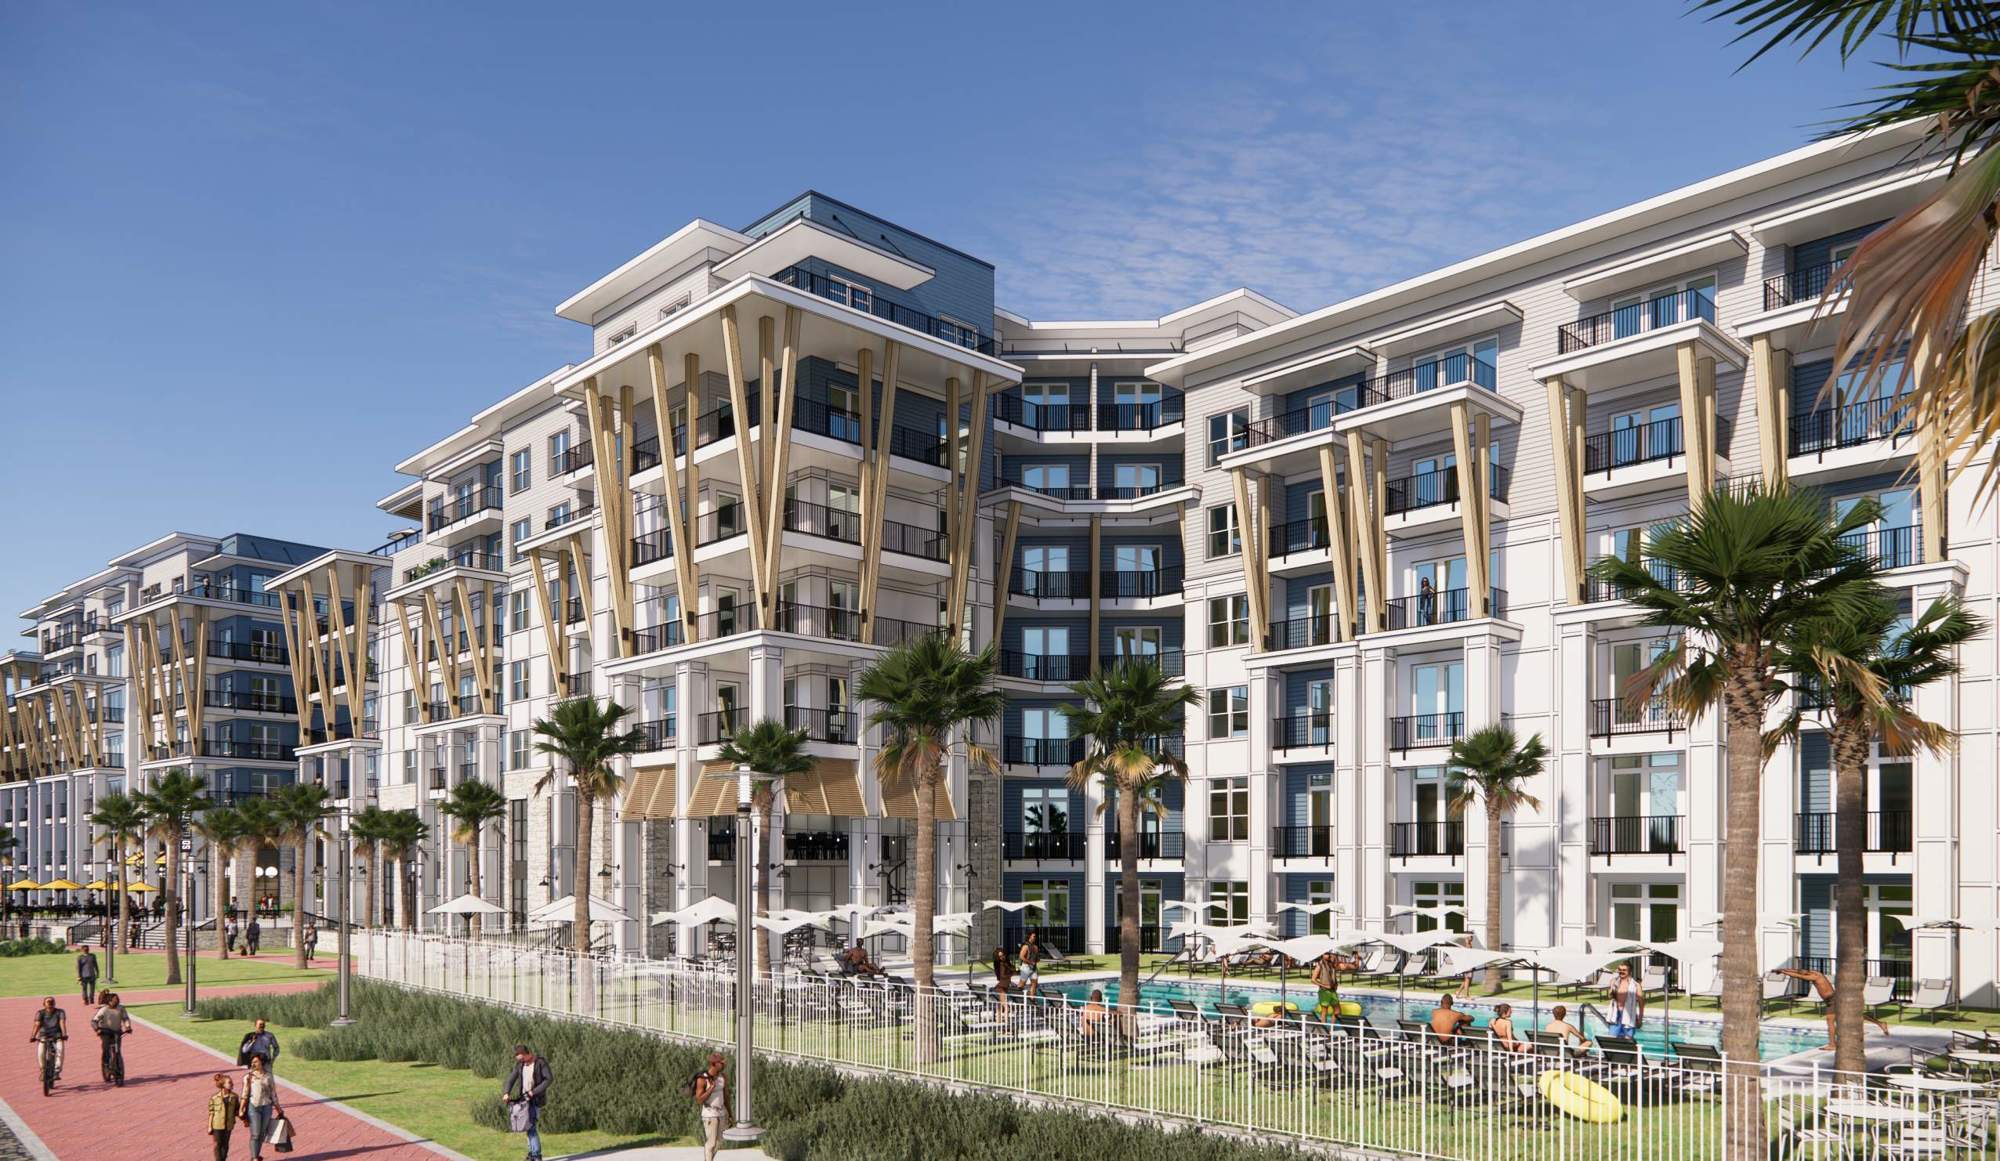 The One Riverside development includes 270 multifamily units in its first phase.